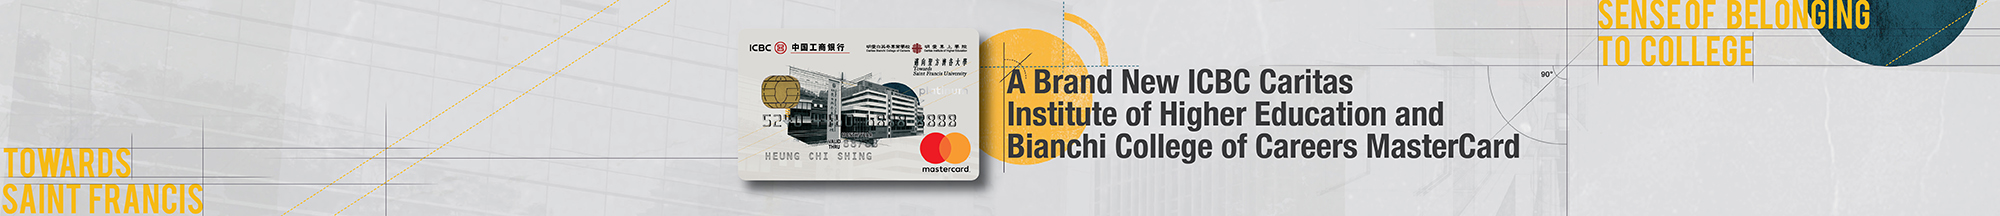 ICBC Caritas Institute of Higher Education and Bianchi College of Careers Mastercard